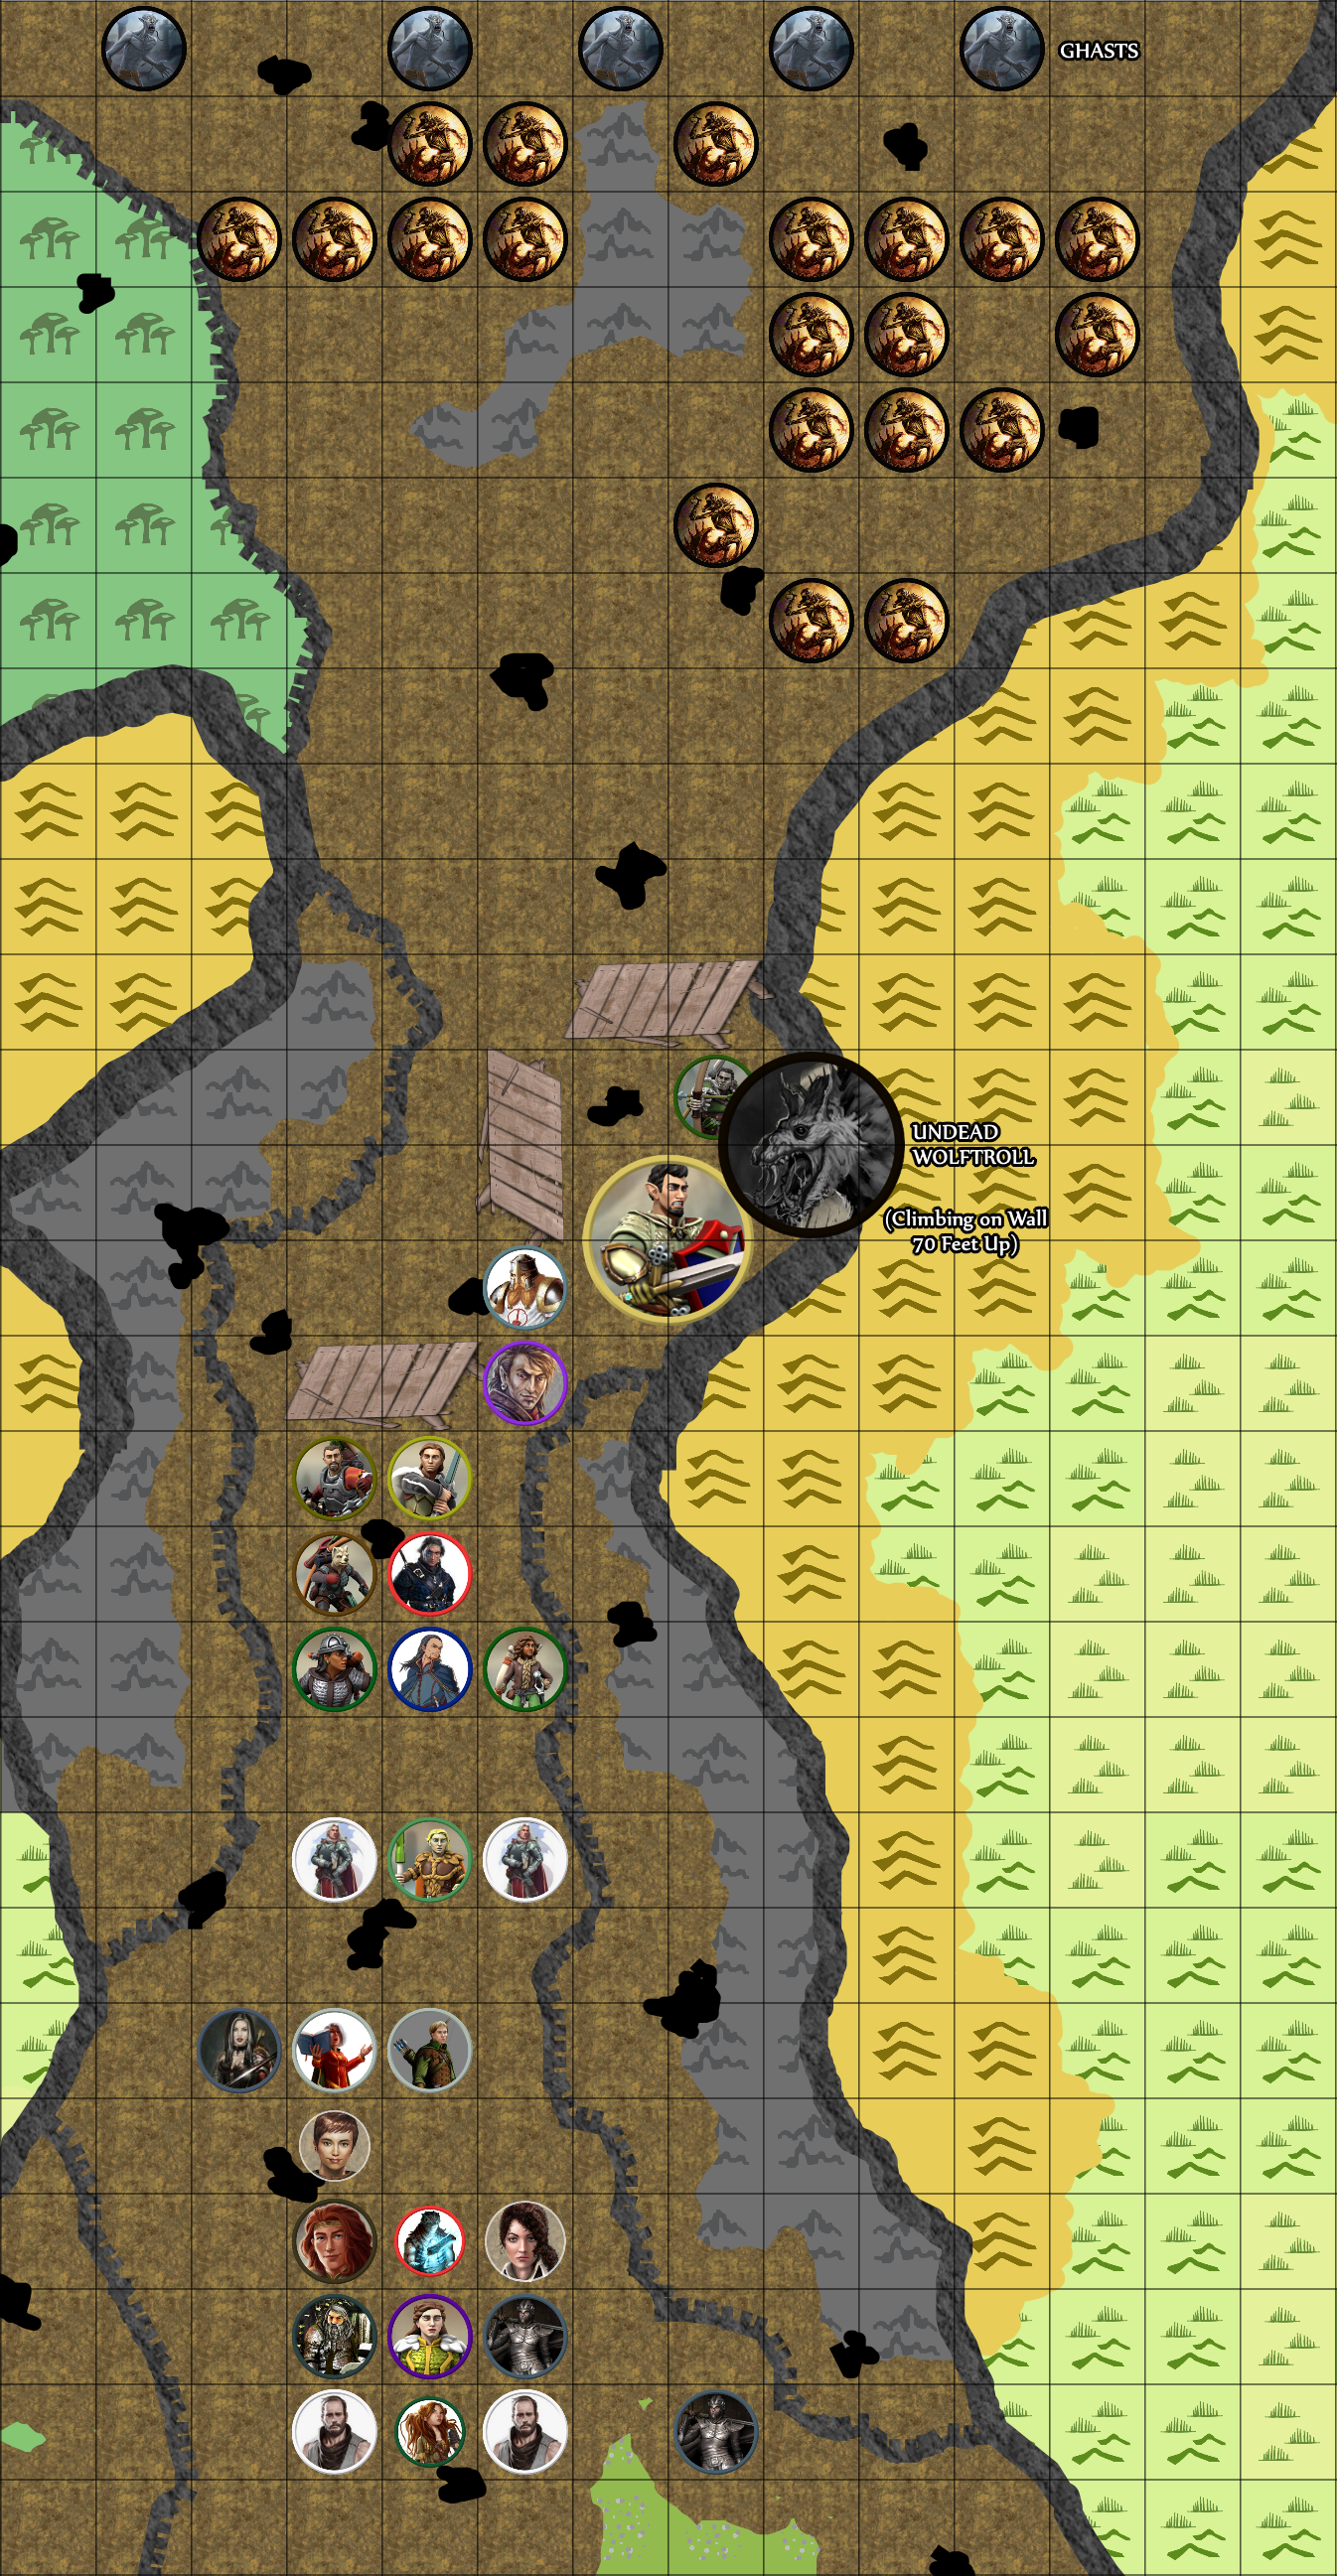 Battle Against the Undead Horde_End of Round One.png